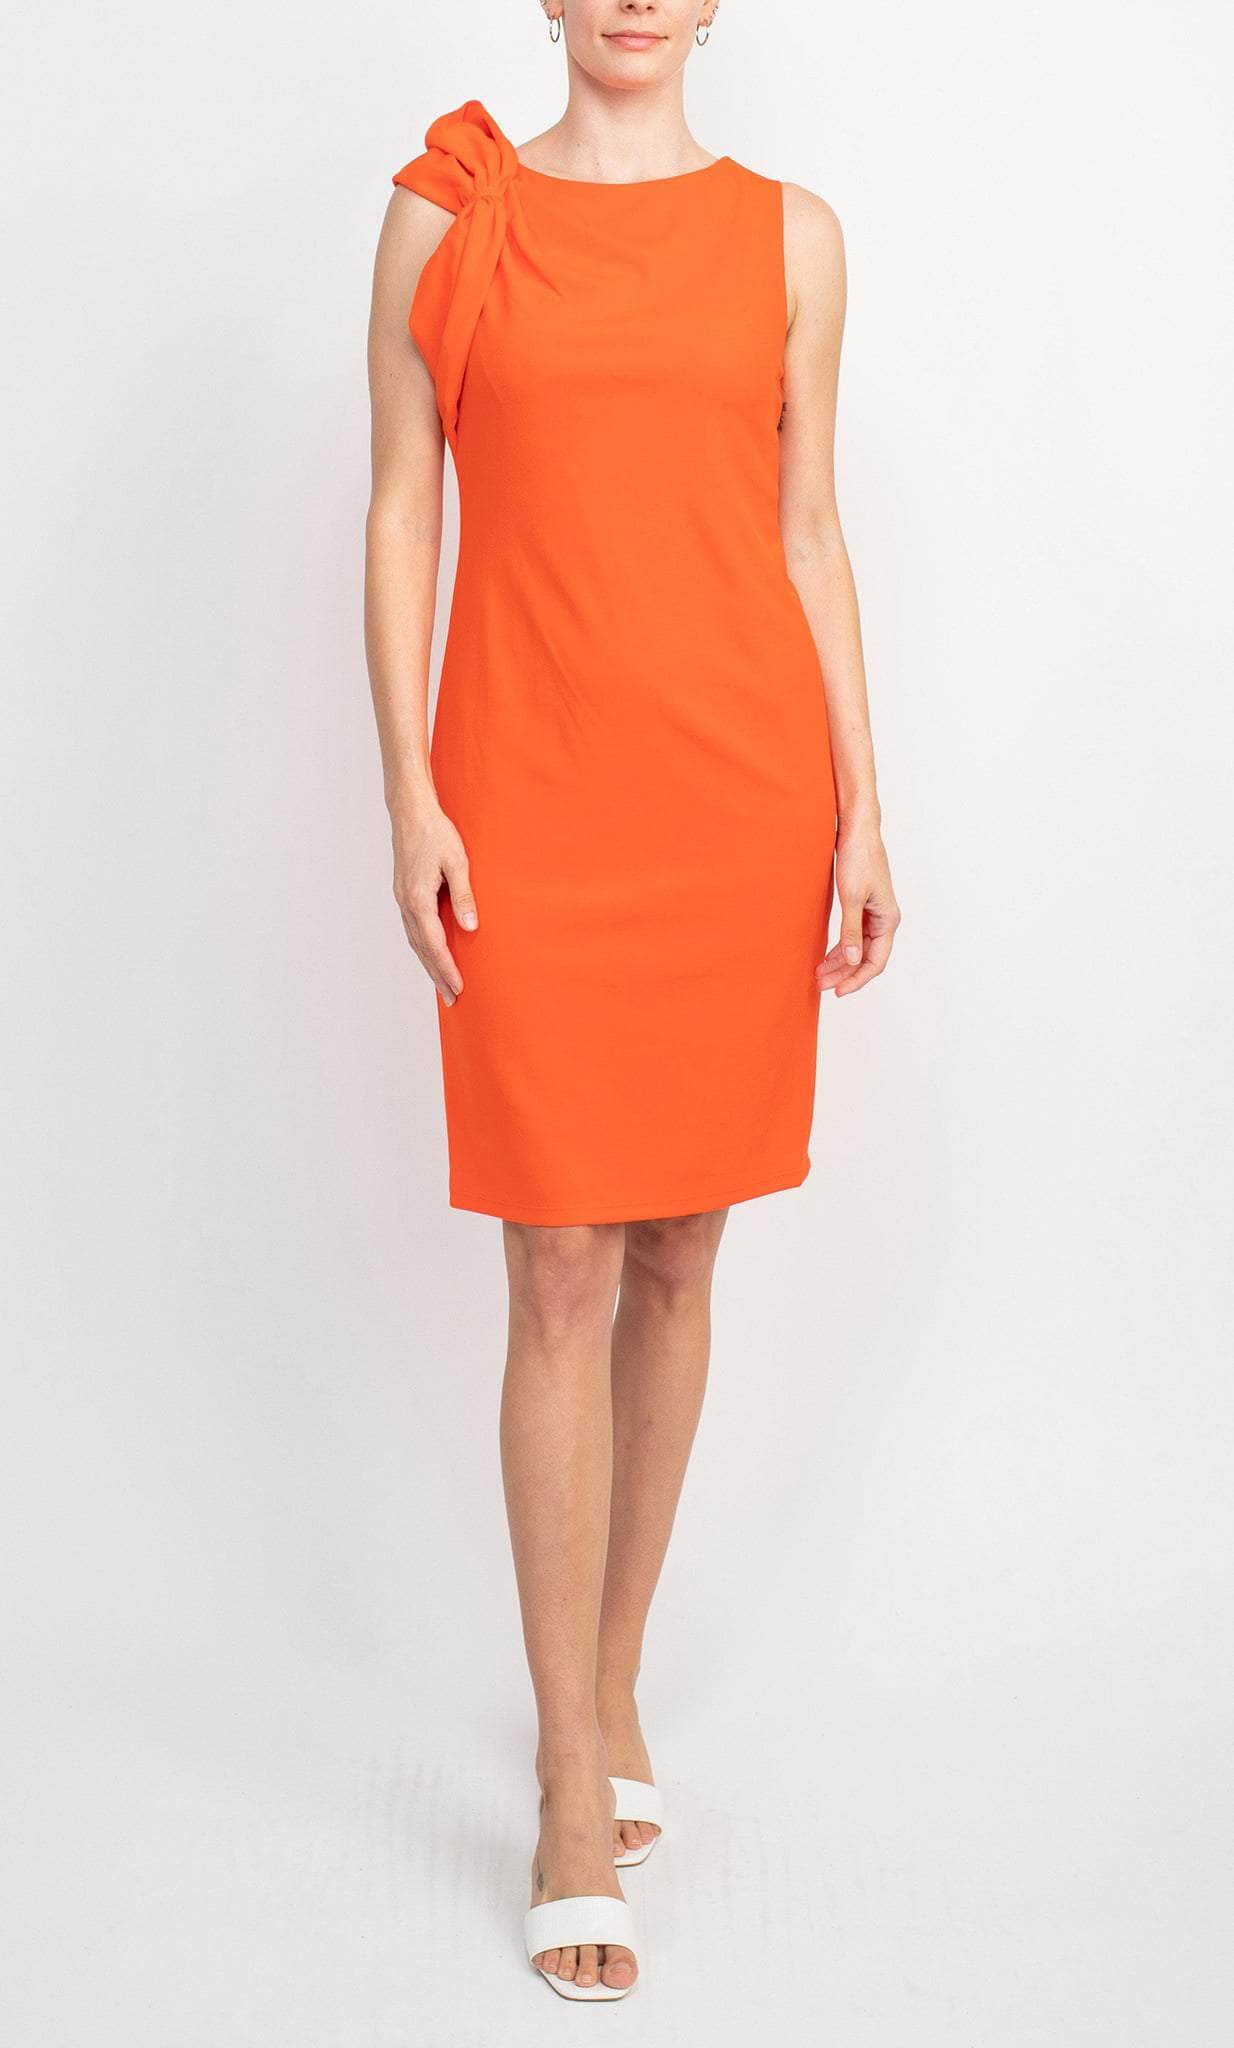 Shelby & Palmer, Shelby & Palmer A1150 - Sleeveless Bow Accented Cocktail Dress